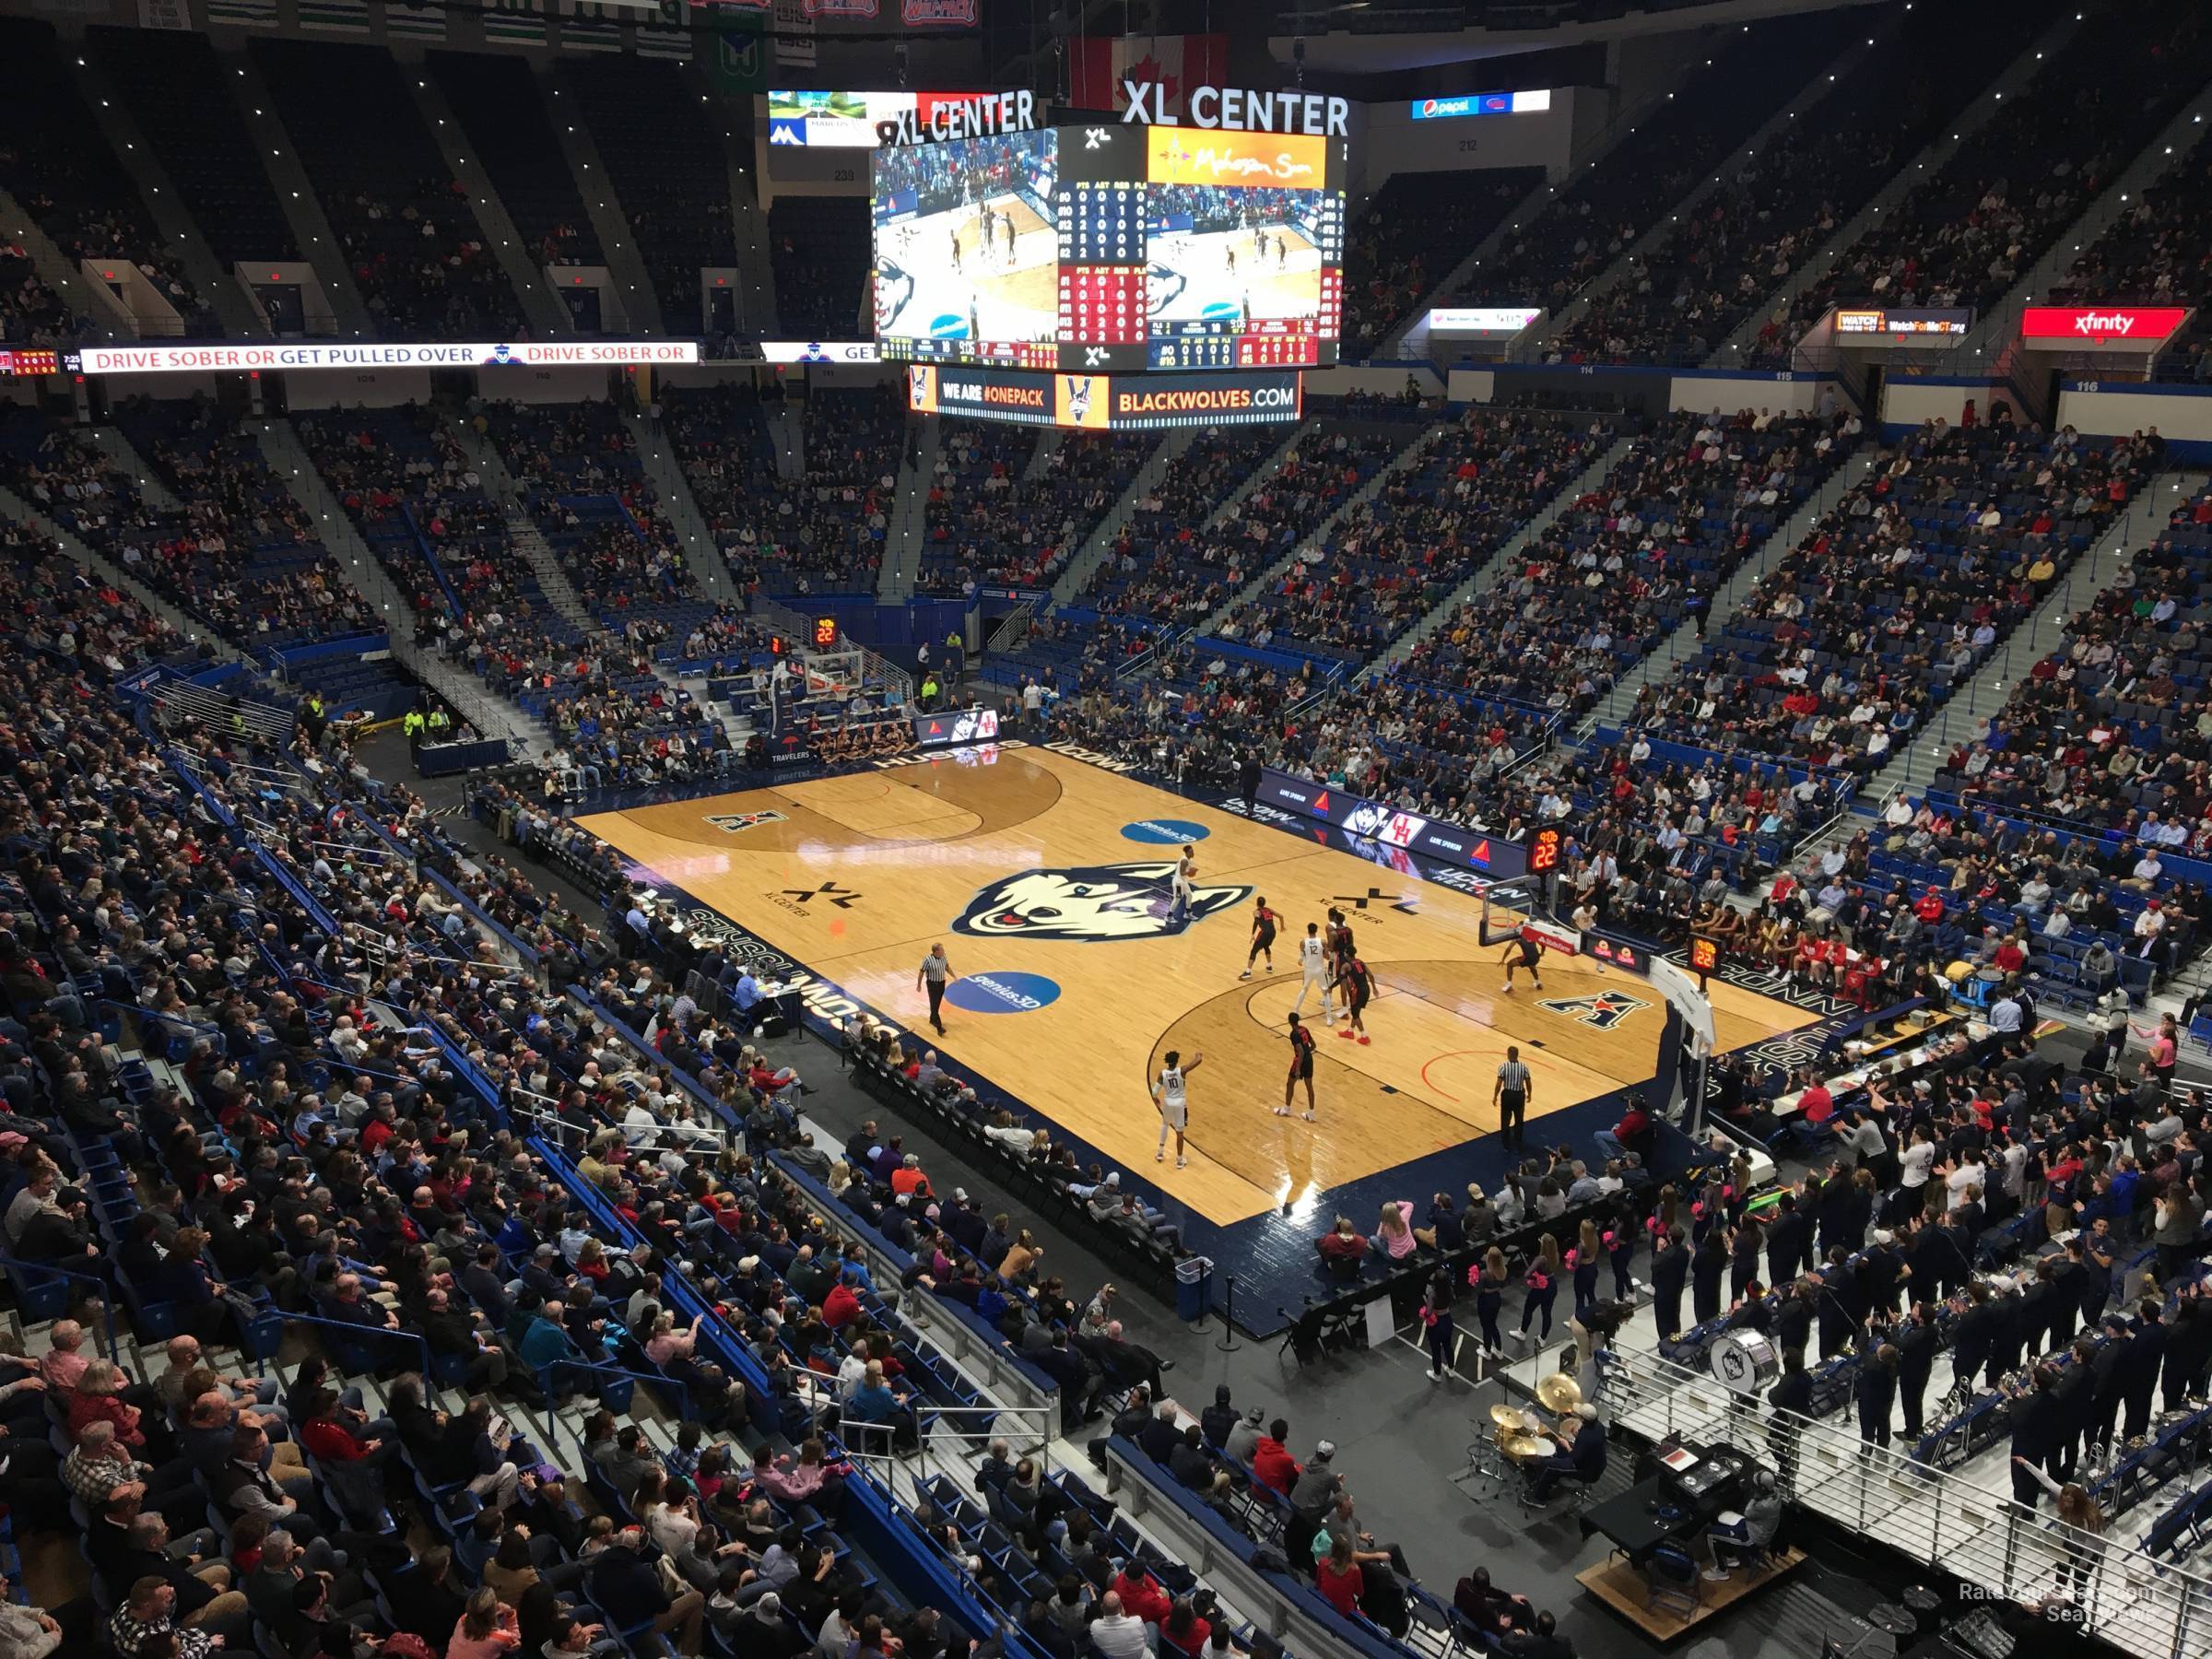 section 229, row a seat view  - xl center